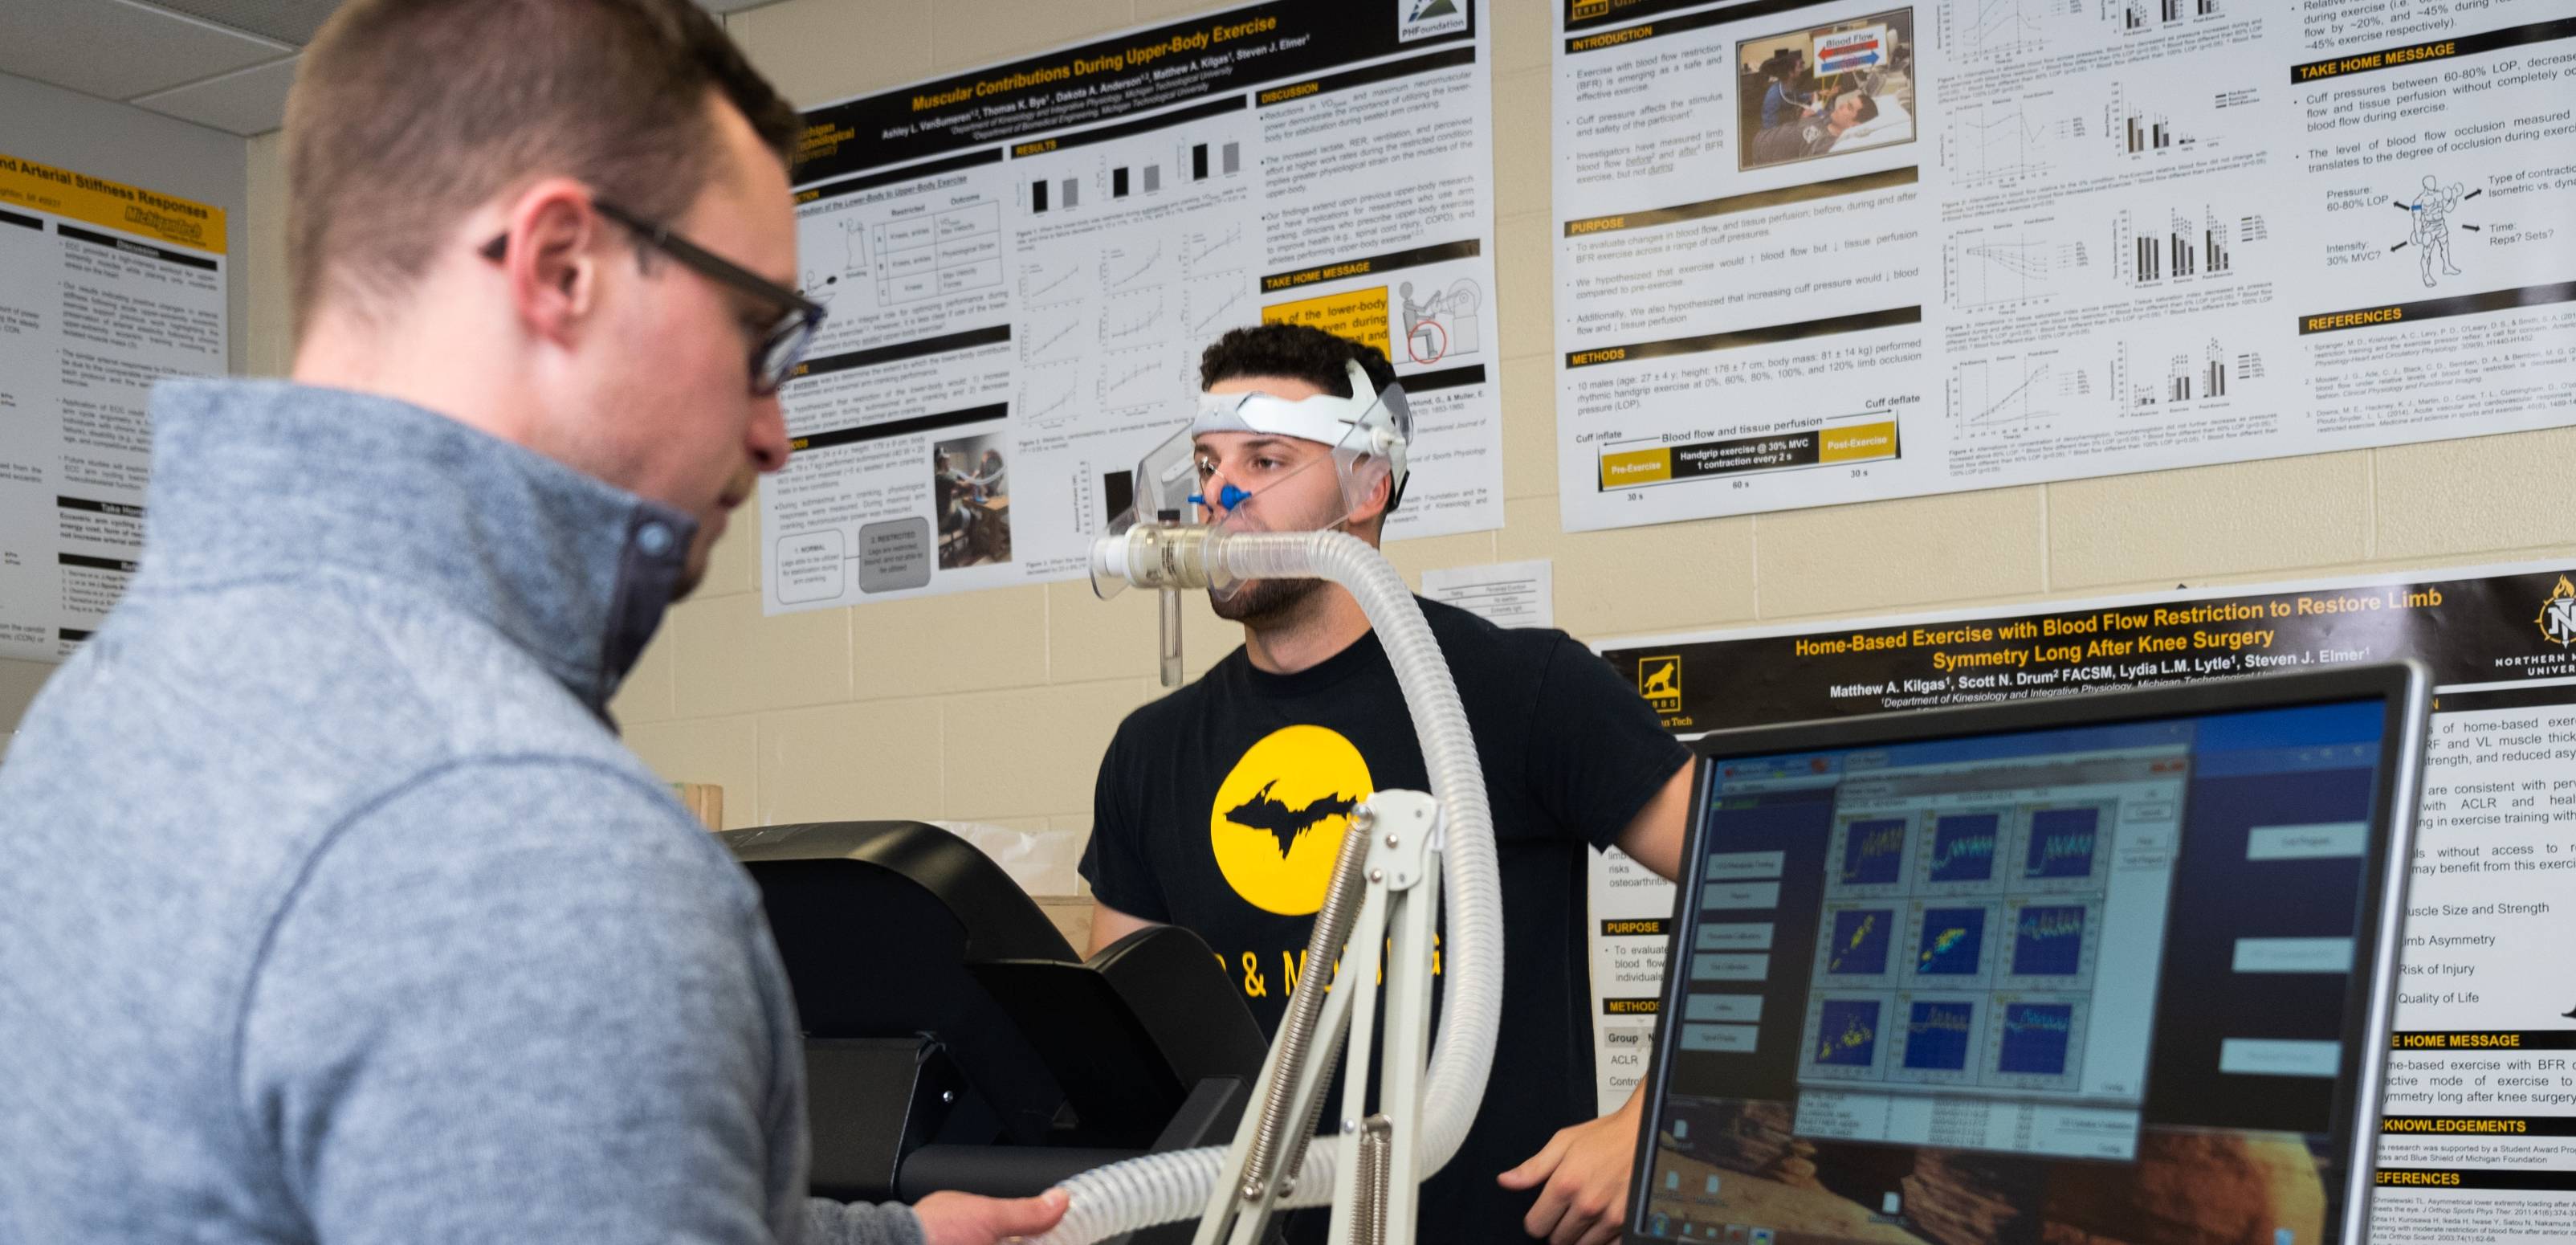 Males doing a VO2 max test in the lab. 